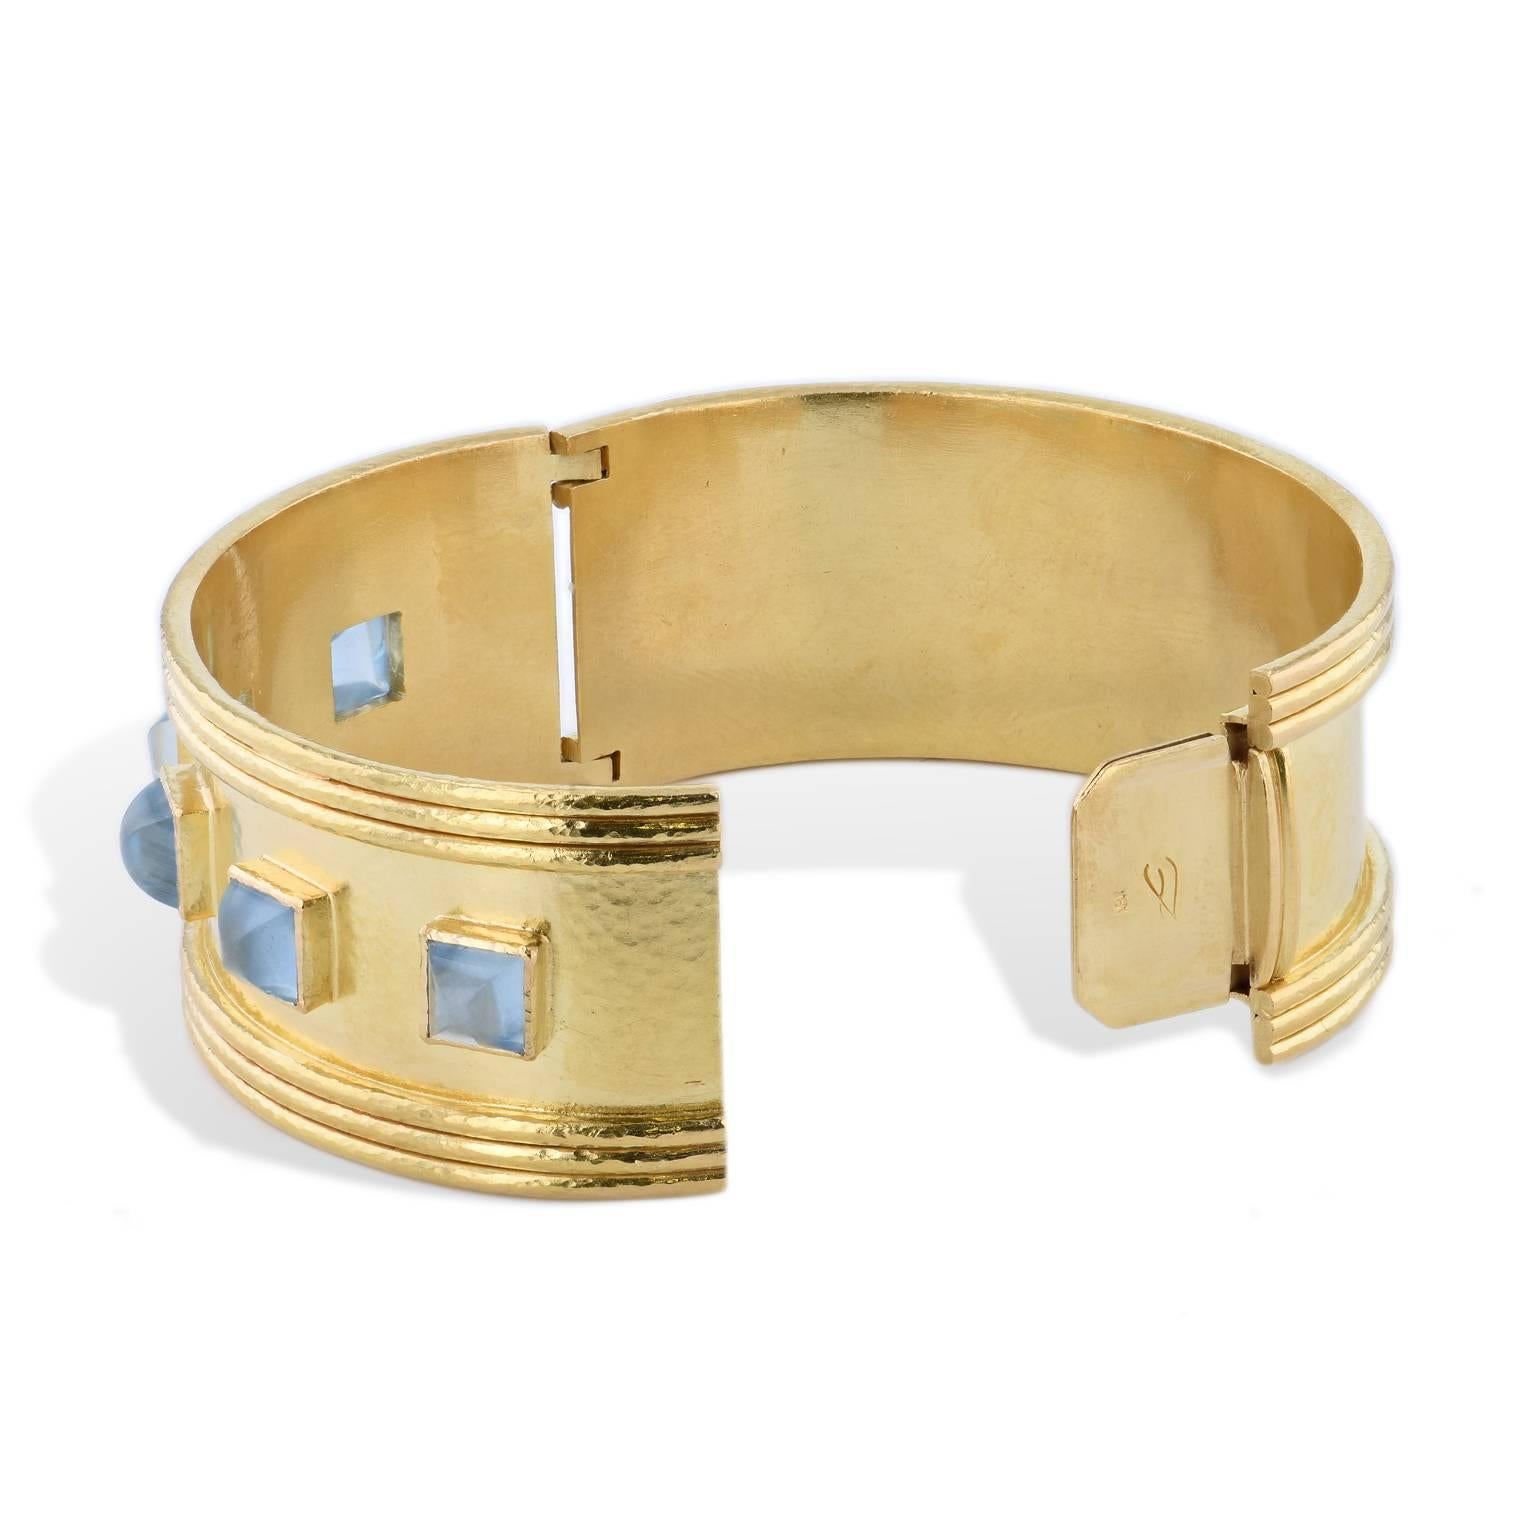 Make a bold statement with this previously loved 18 karat yellow gold twenty-five millimeter hinge bracelet featuring five aquamarine cabochons.